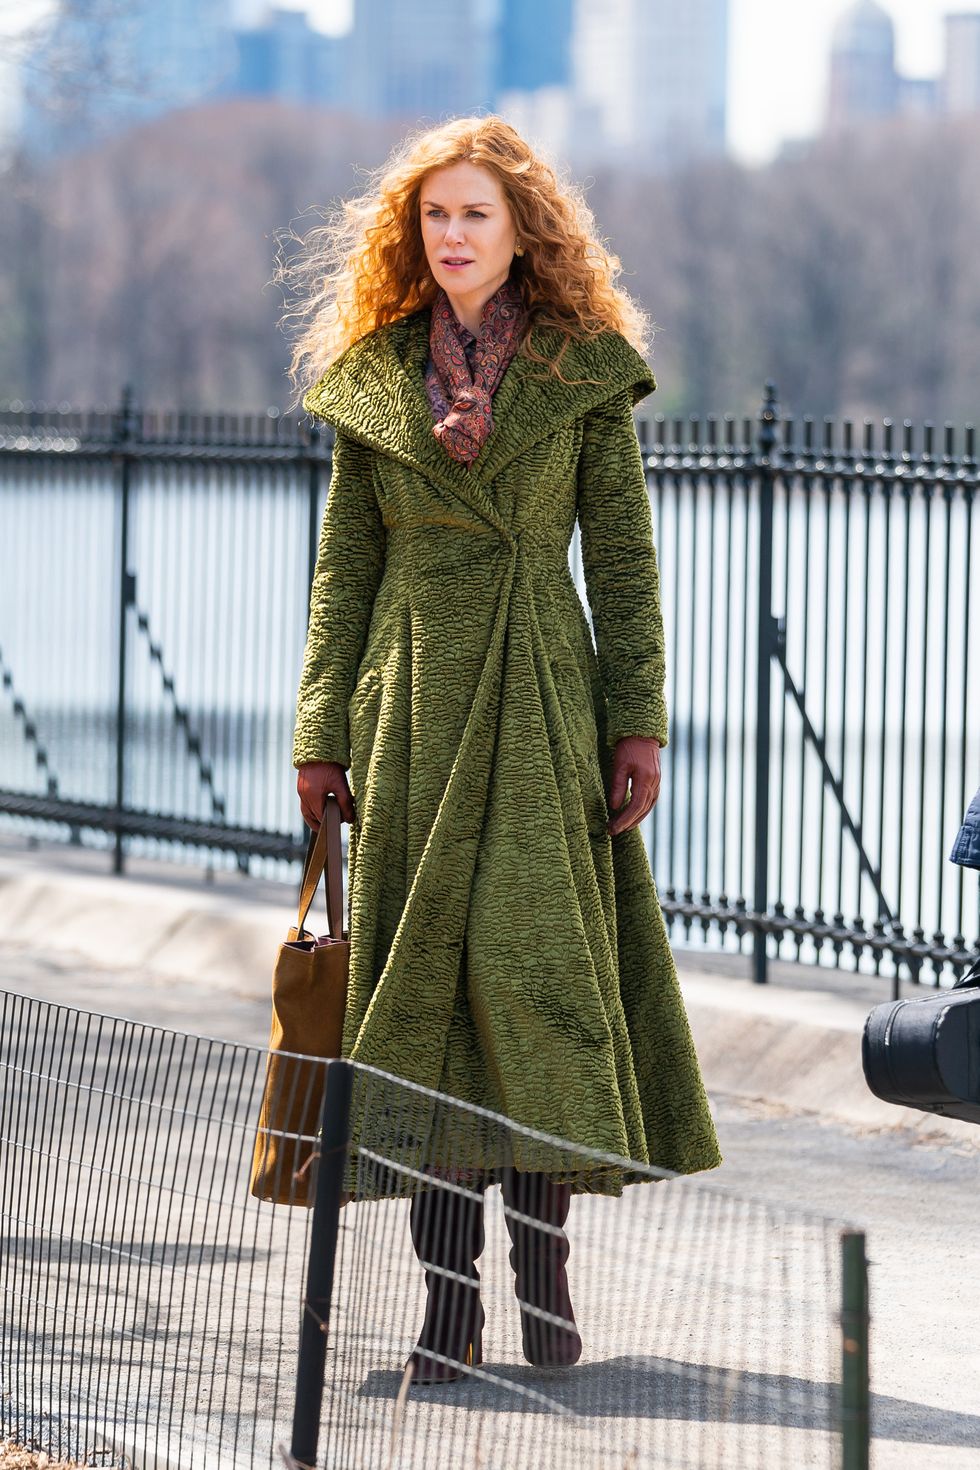 new york, new york   march 27 nicole kidman is seen on set for the undoing in central park on march 27, 2019 in new york city photo by gothamgc images